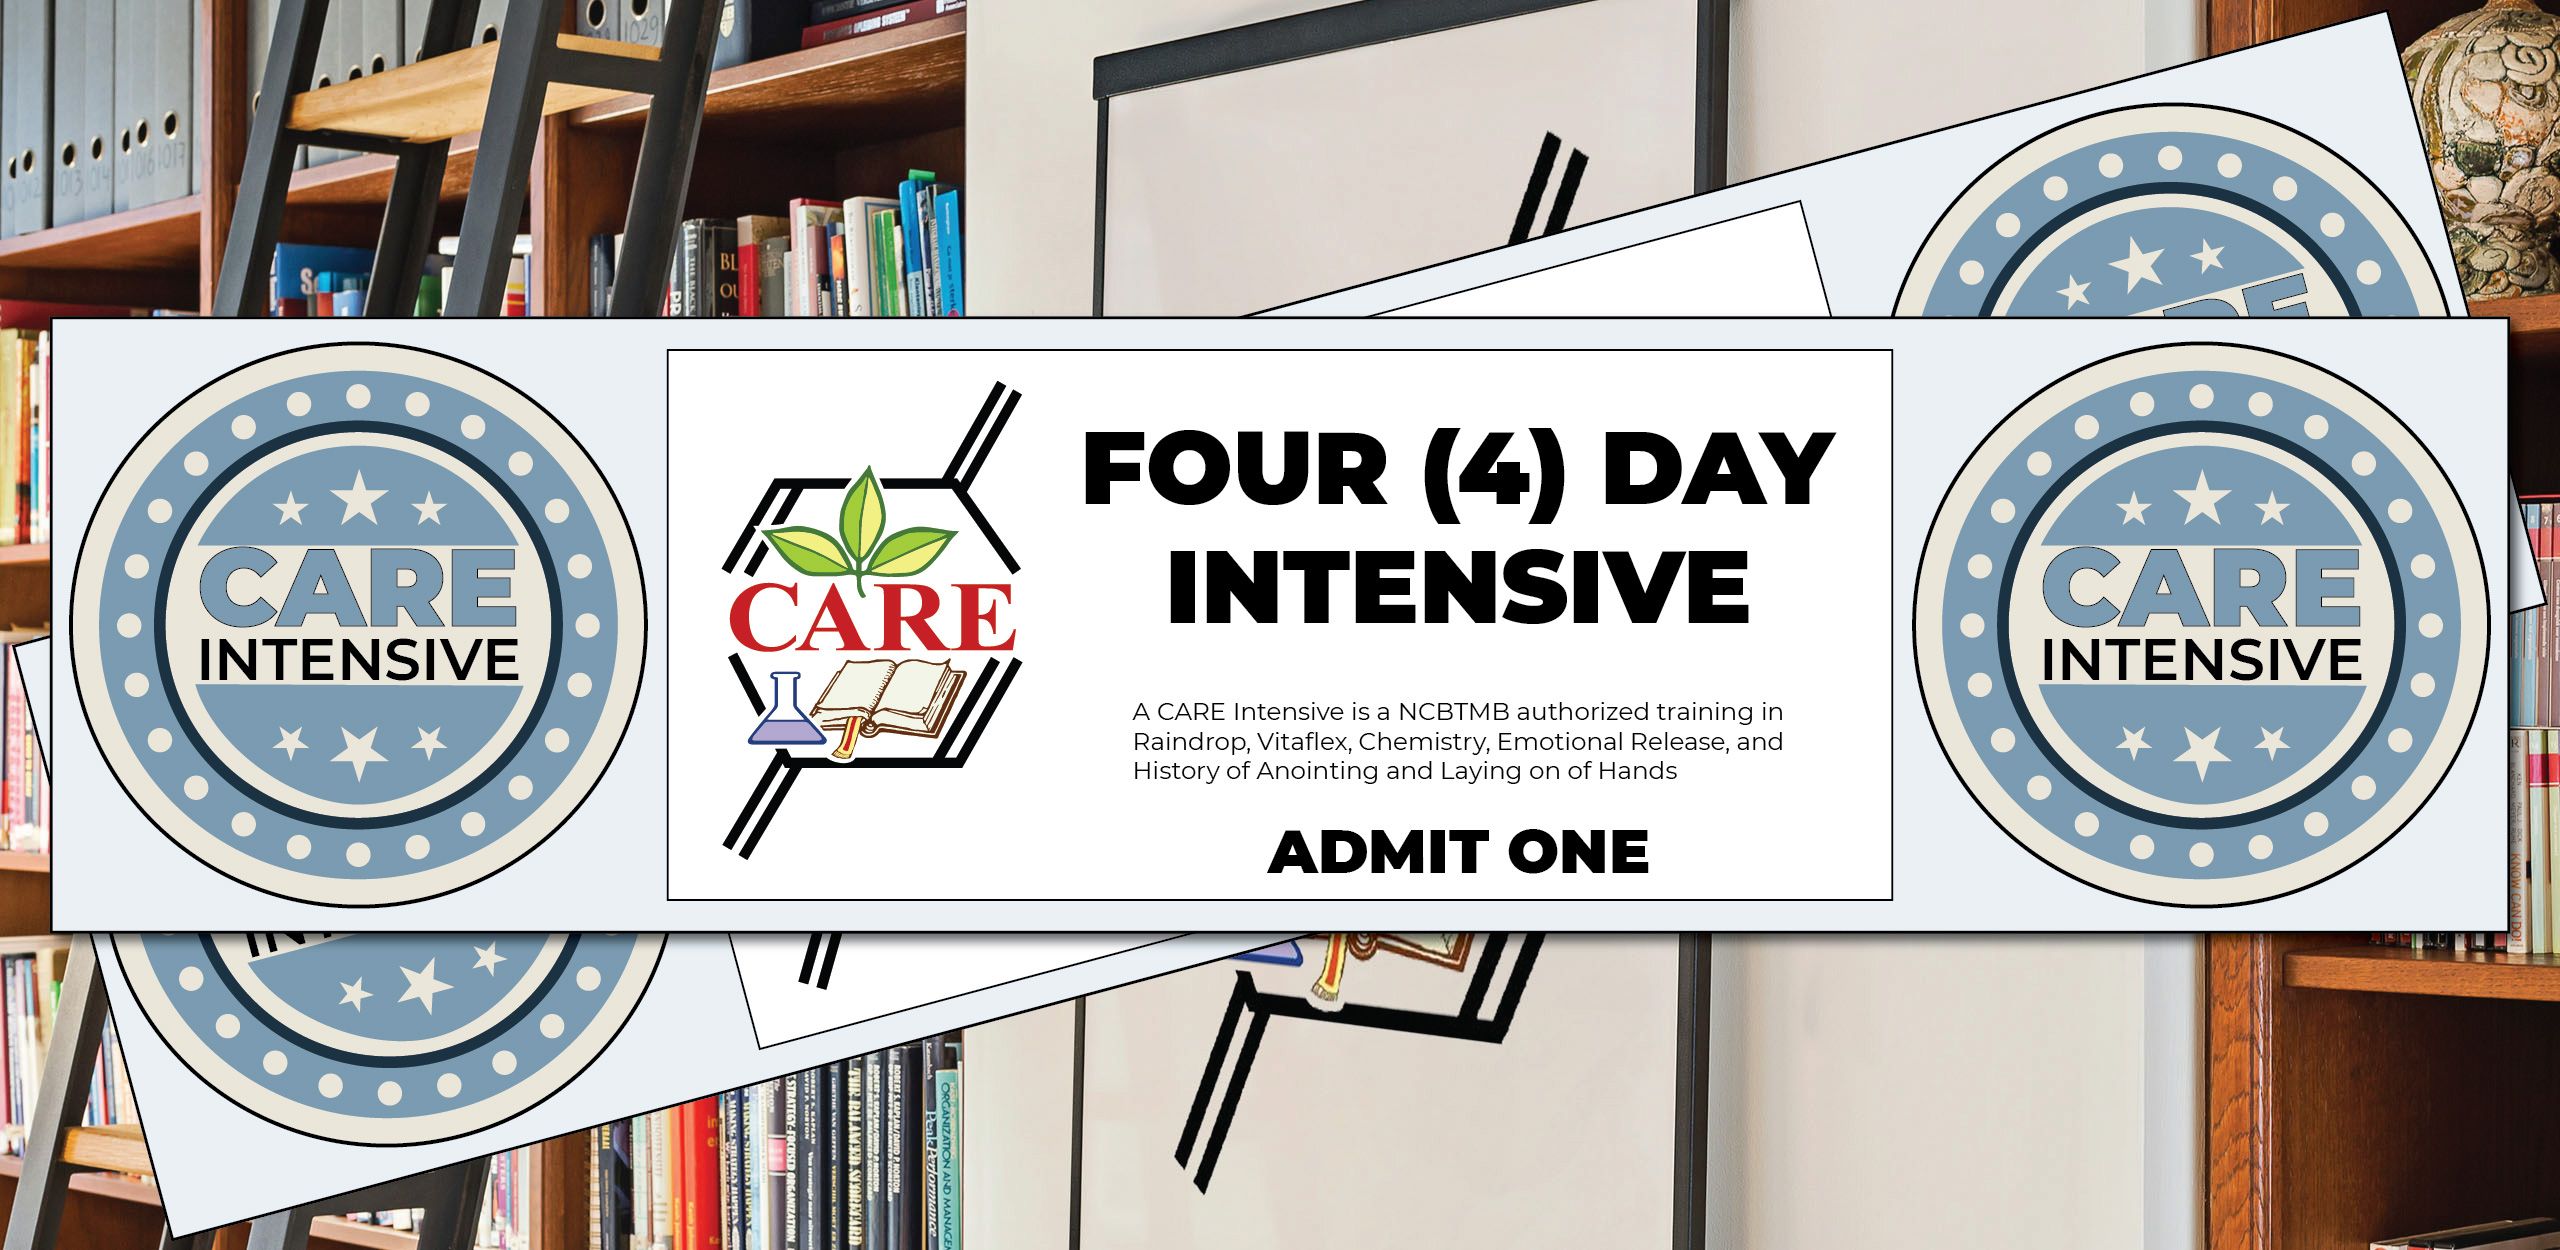 The Care 4 Day Intensive